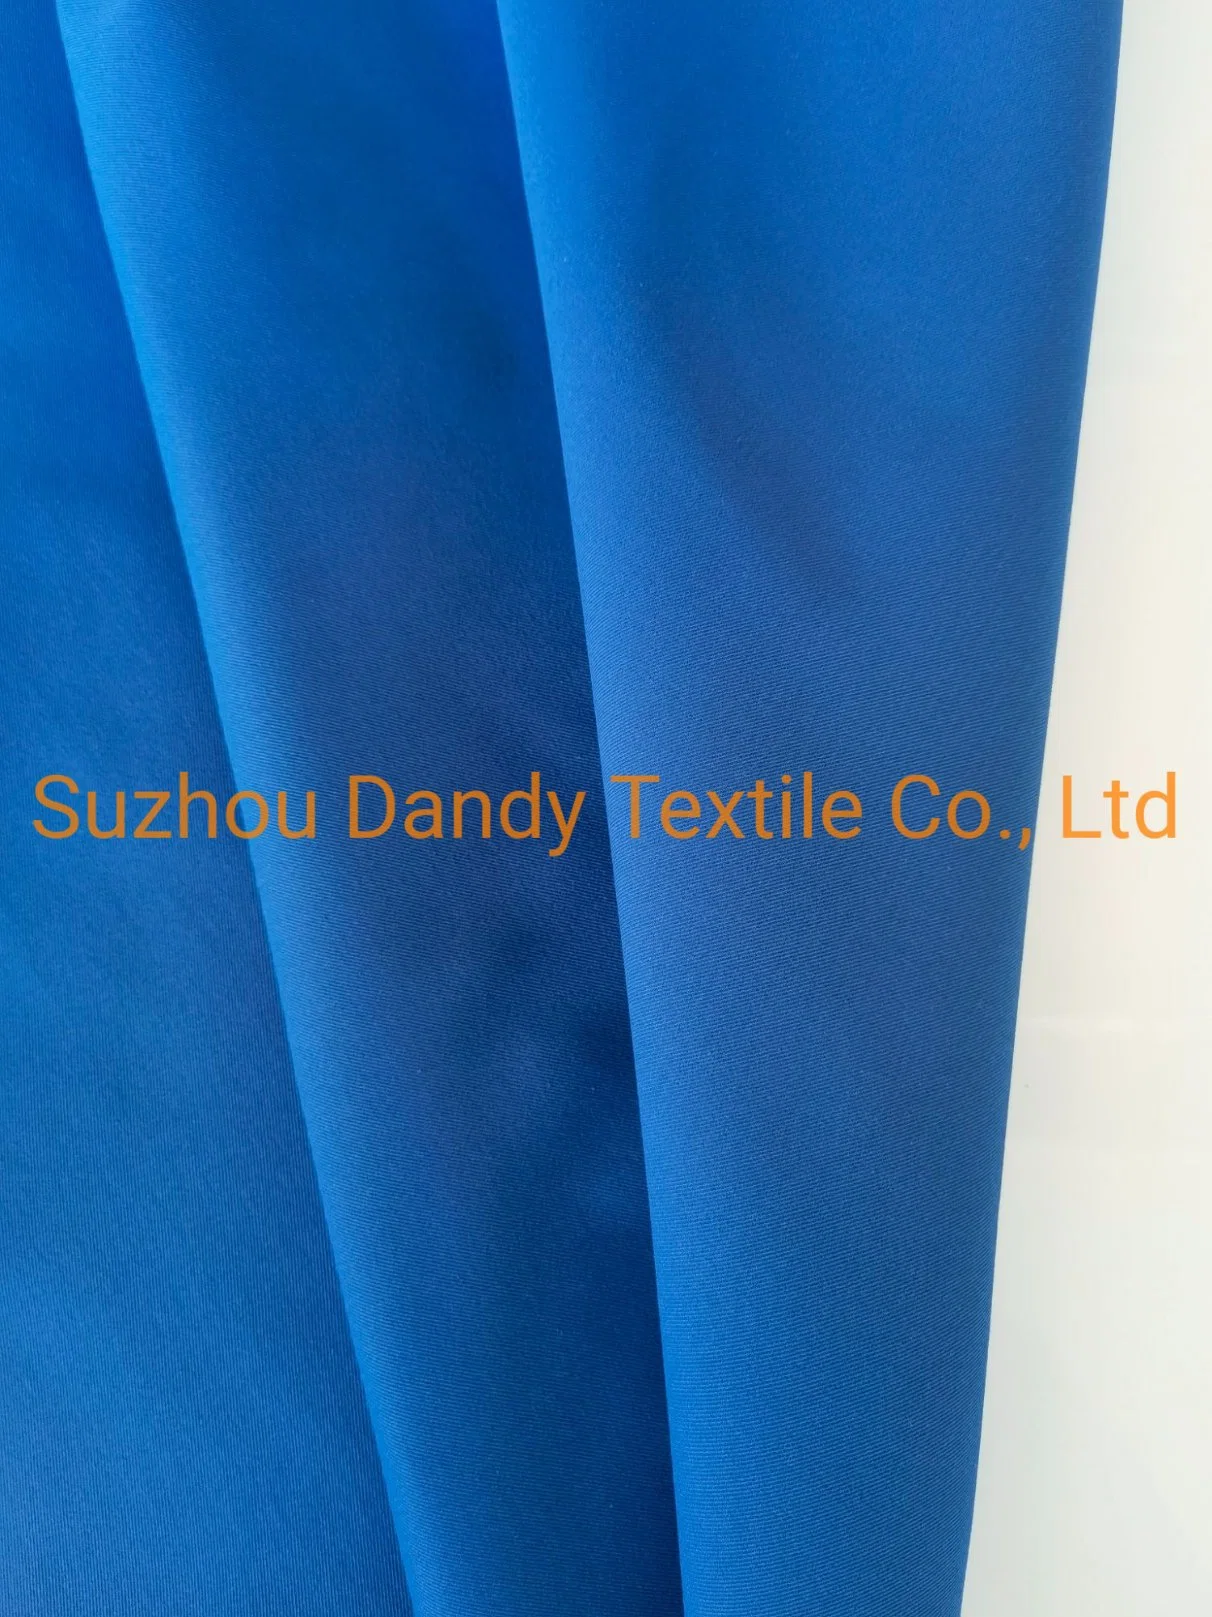 High Performance Anti-Static Woven China Outdoor Clothes 100%Polyester T400 Medium Weight Textile